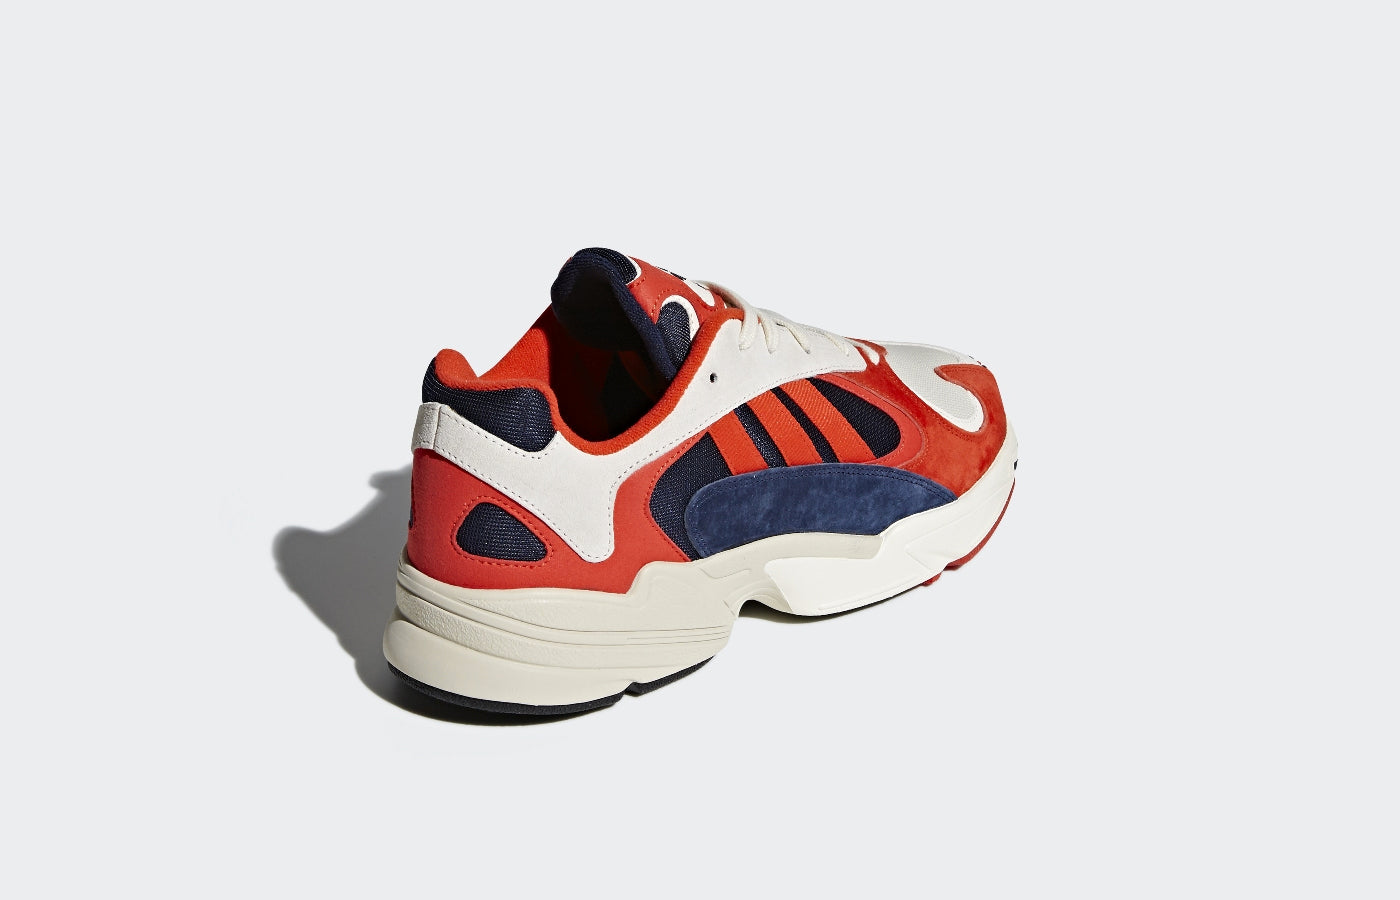 adidas yung 1 femme rouge